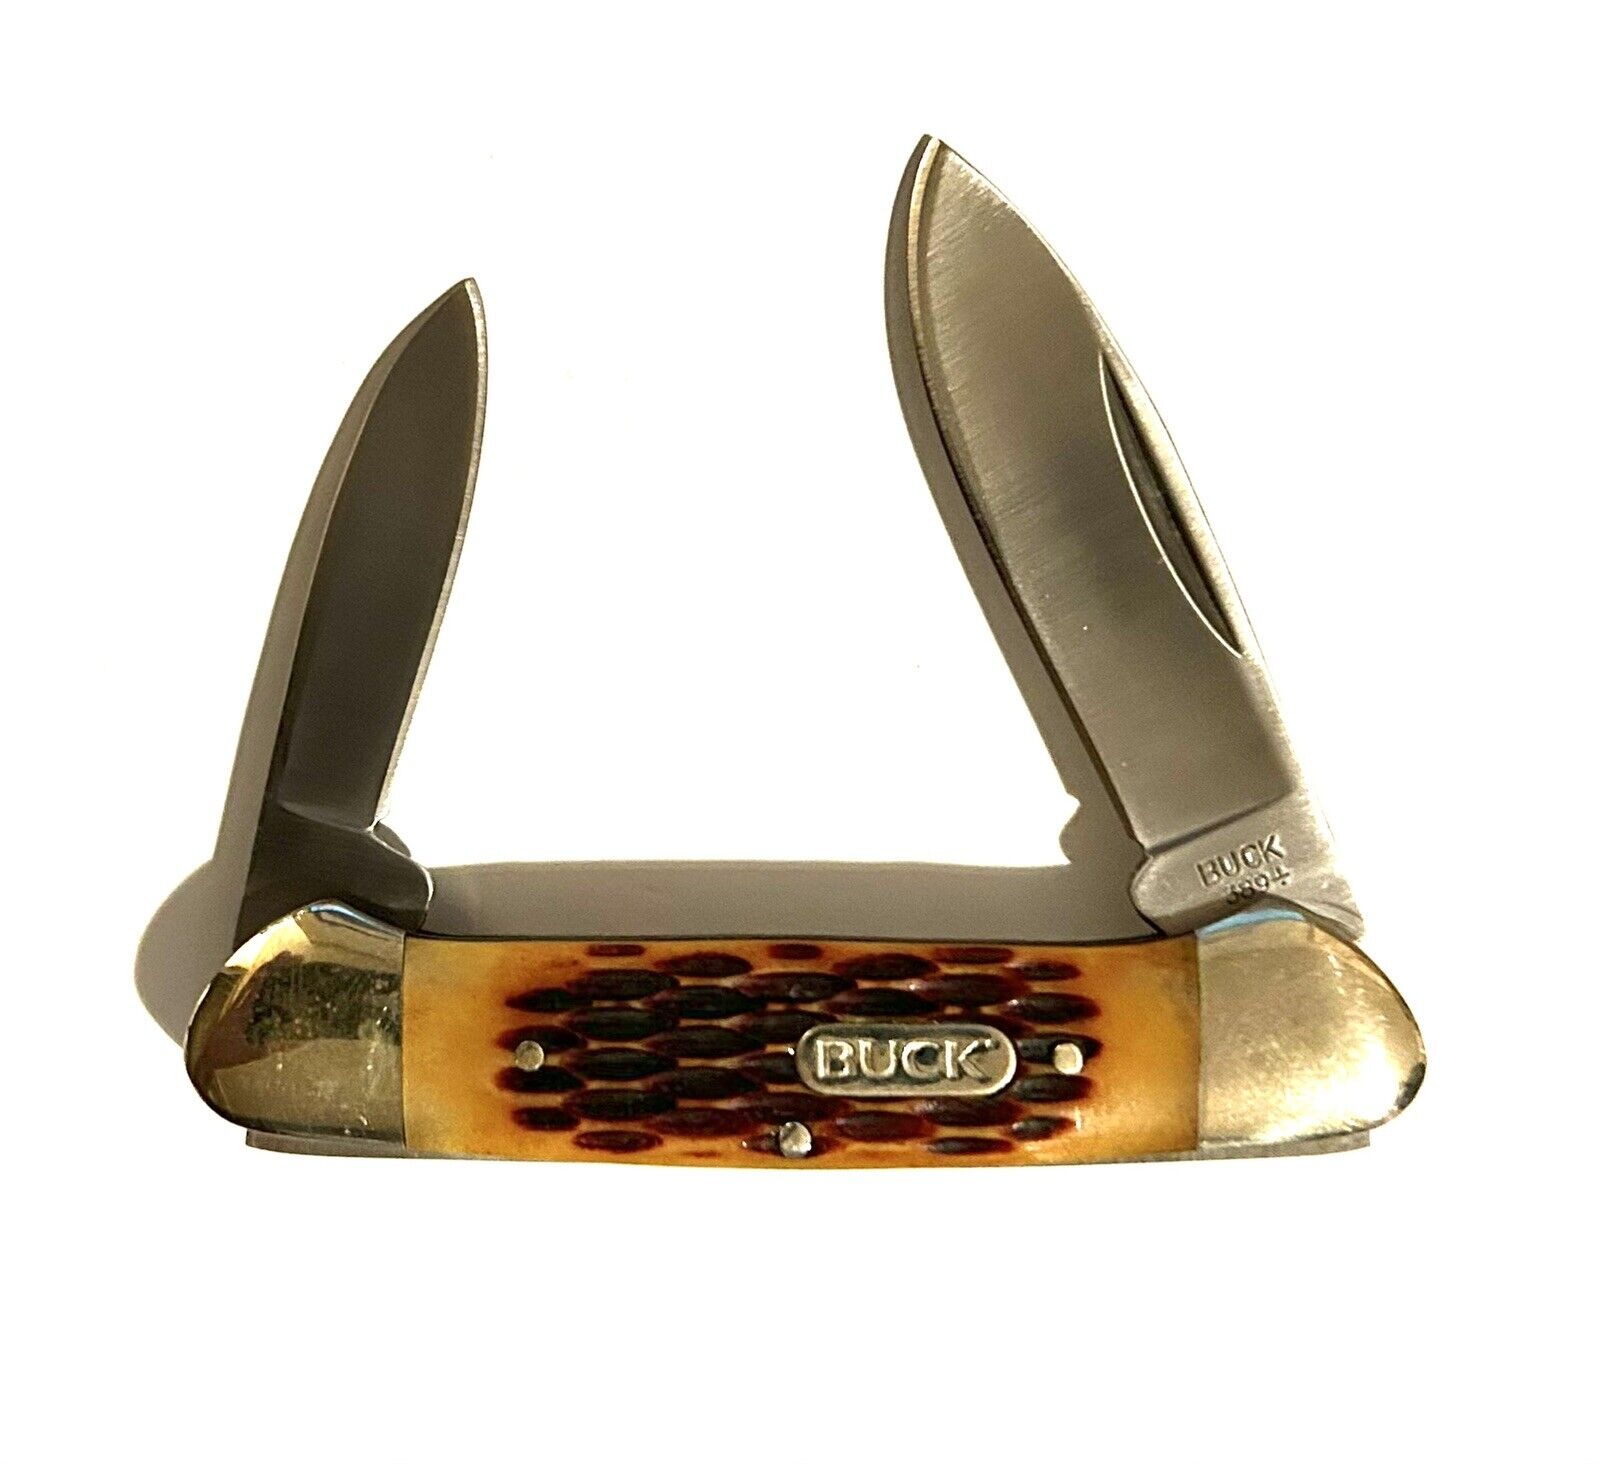 BUCK 389 Canoe 2 Blade Pocket Knife with Bone Handles - Lightly Used and Carried